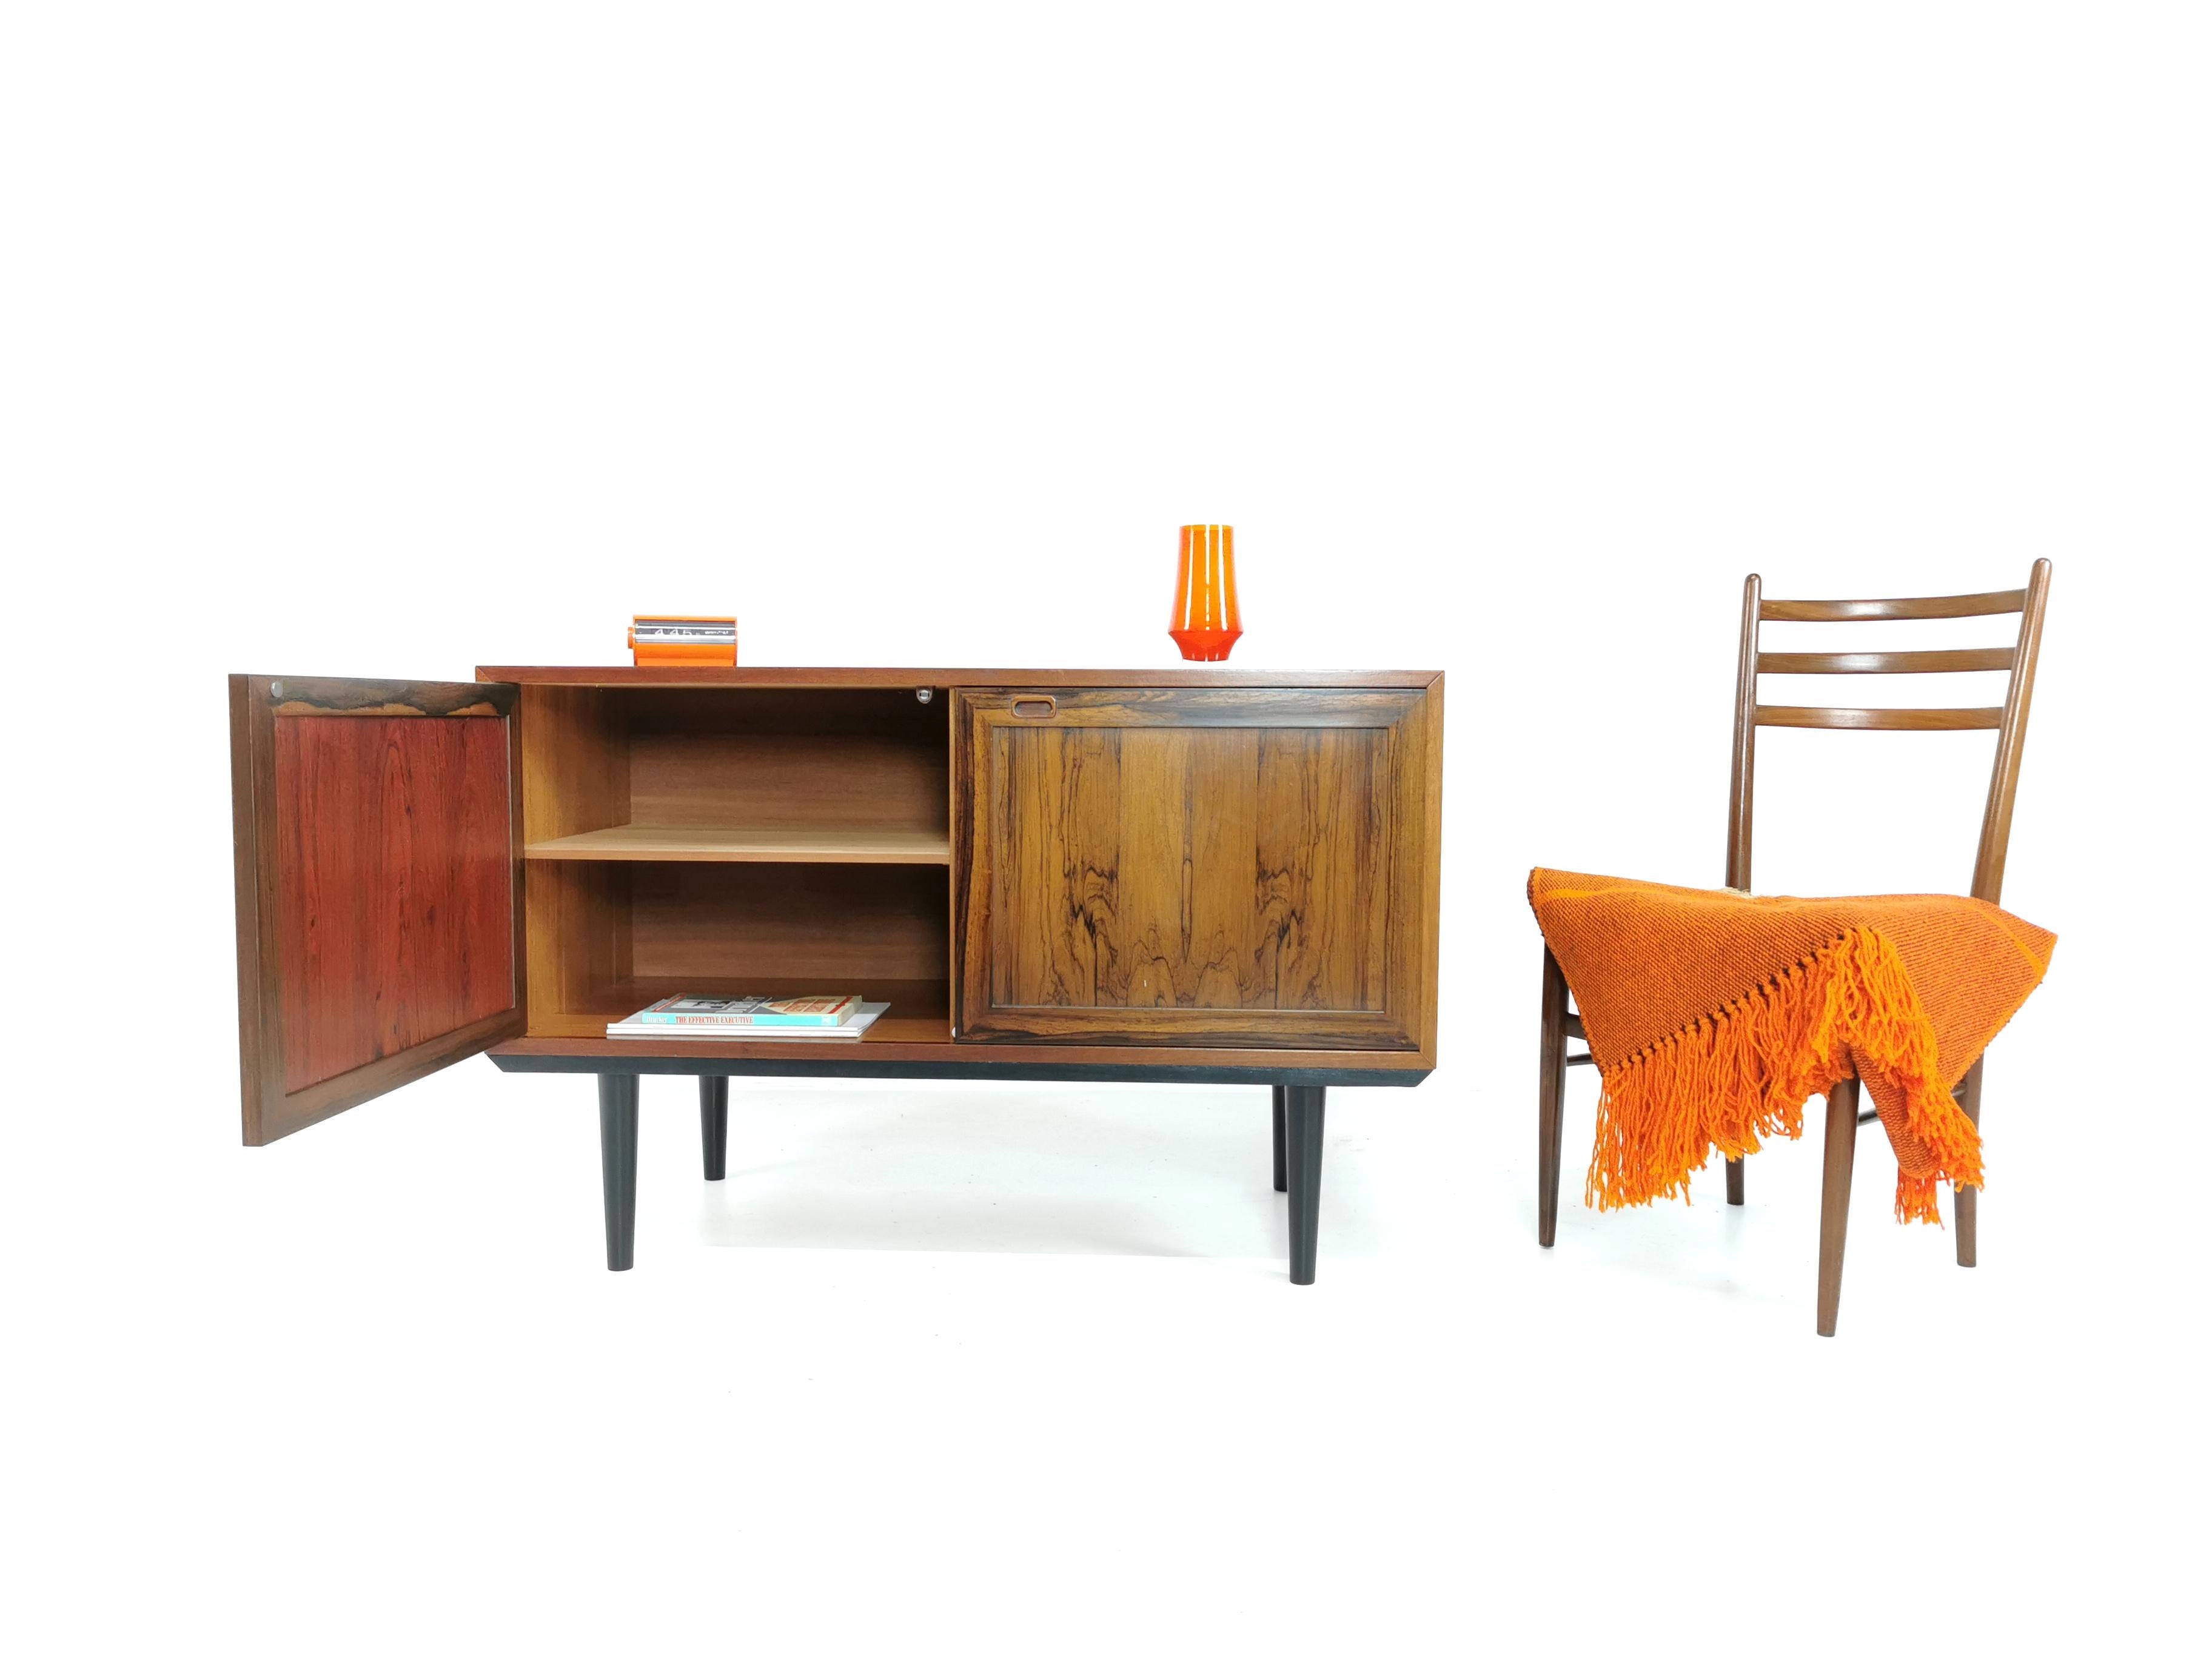 Danish Rosewood Sideboard / Cabinet.

A high-quality cabinet which can also be used as a compact sideboard. 

Made in Denmark, circa 1960s - 1970s.

Rosewood has rich colouring and pronounced grain. Raised on ebonised timber legs.